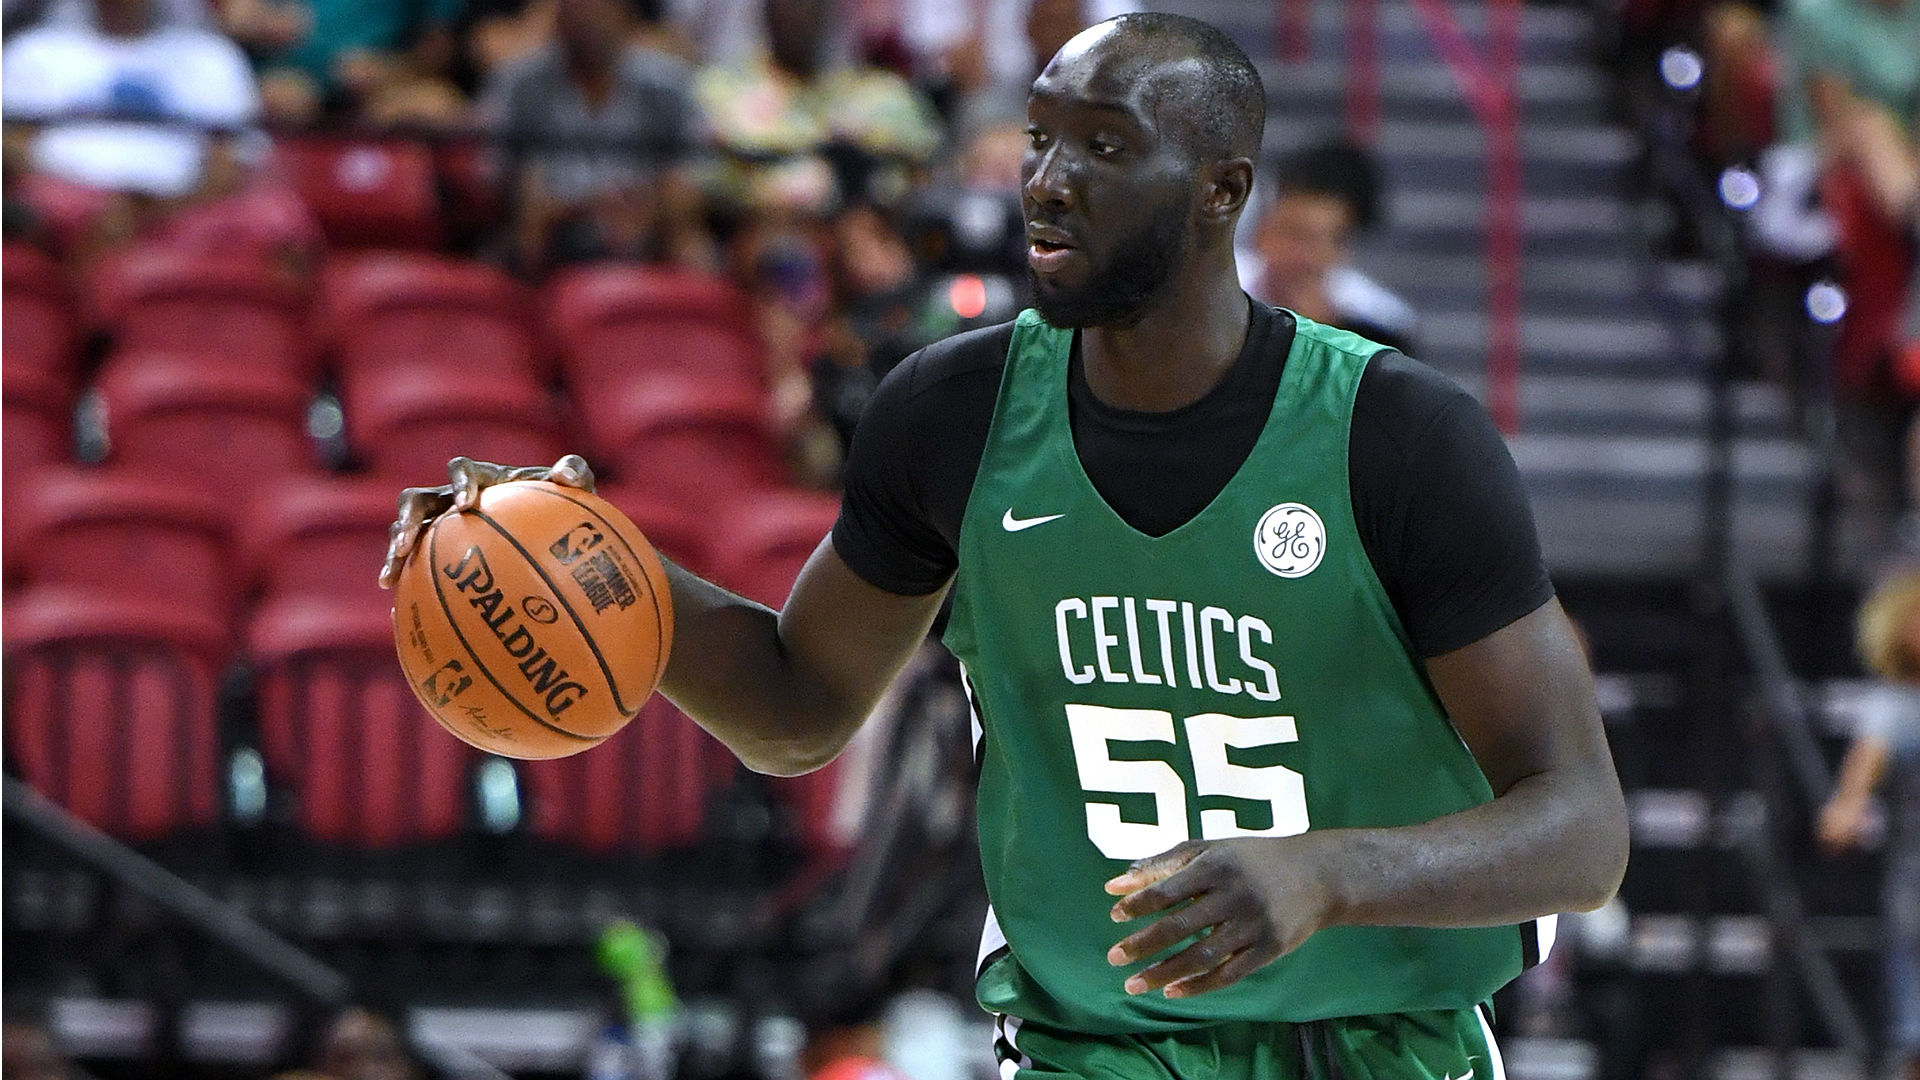 The Boston Celtics are taking Tacko Fall's development "very seriously", general manager Danny Ainge said.